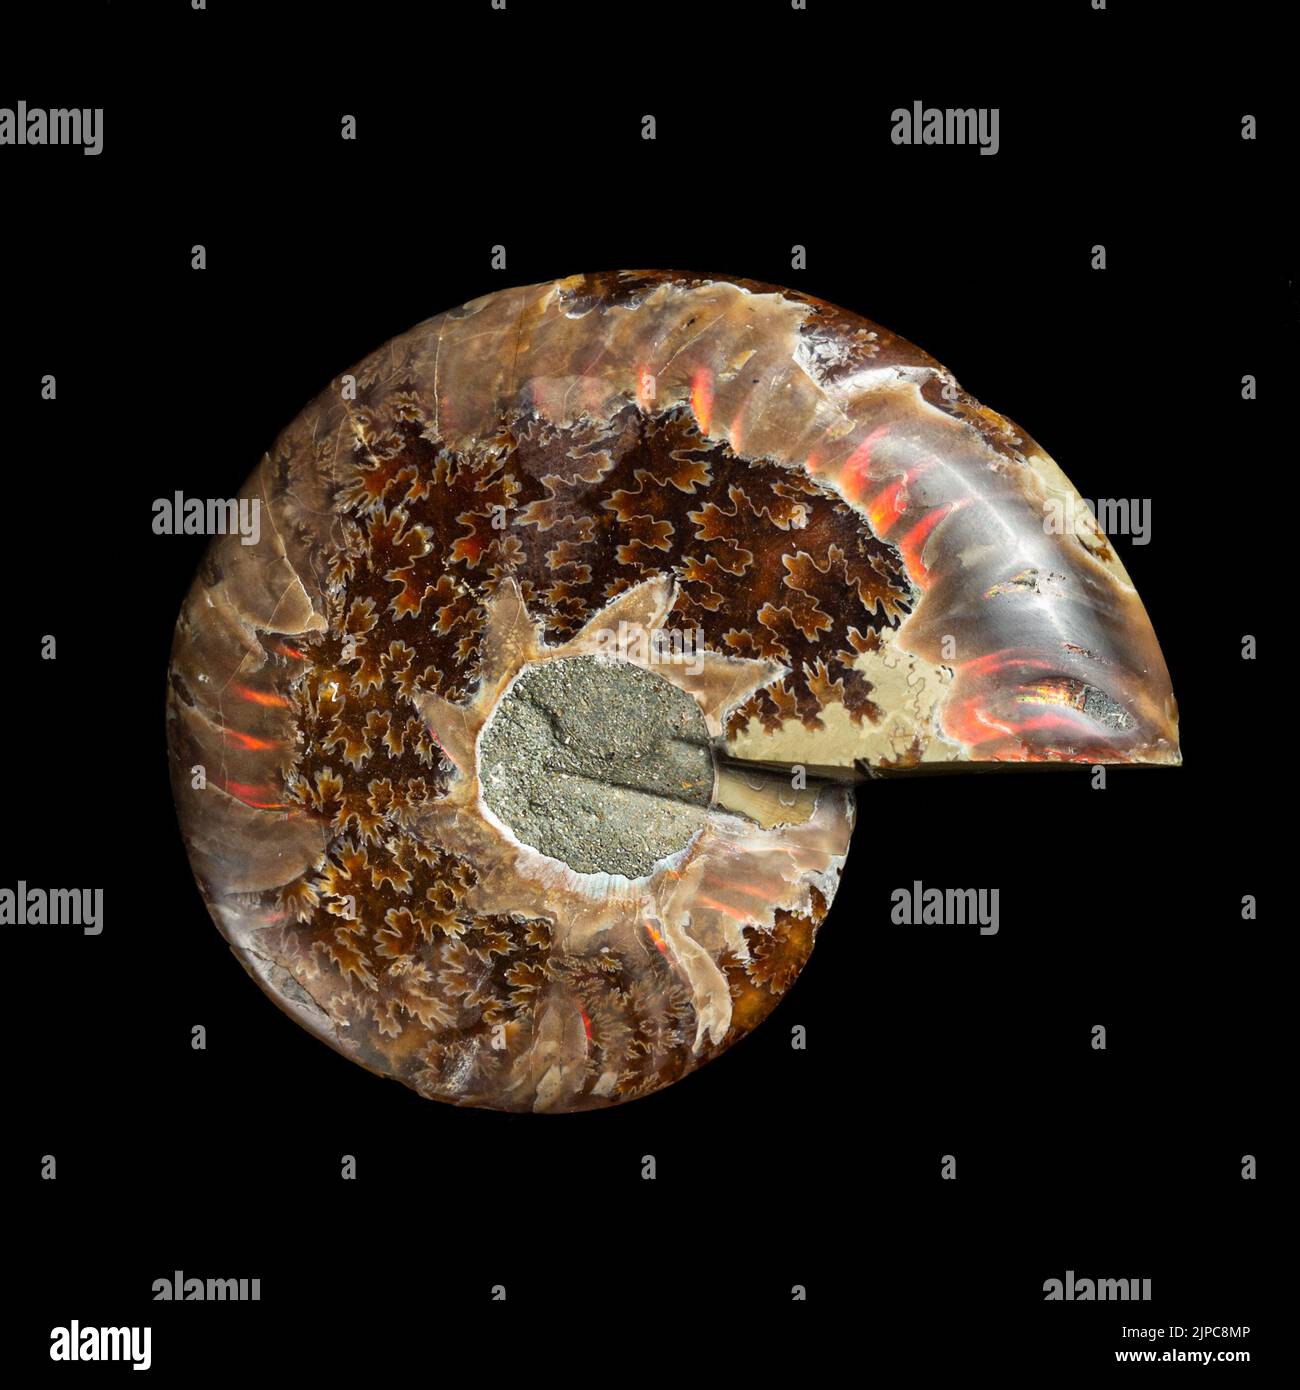 Ammonite fossil shell isolated on black background. Stock Photo